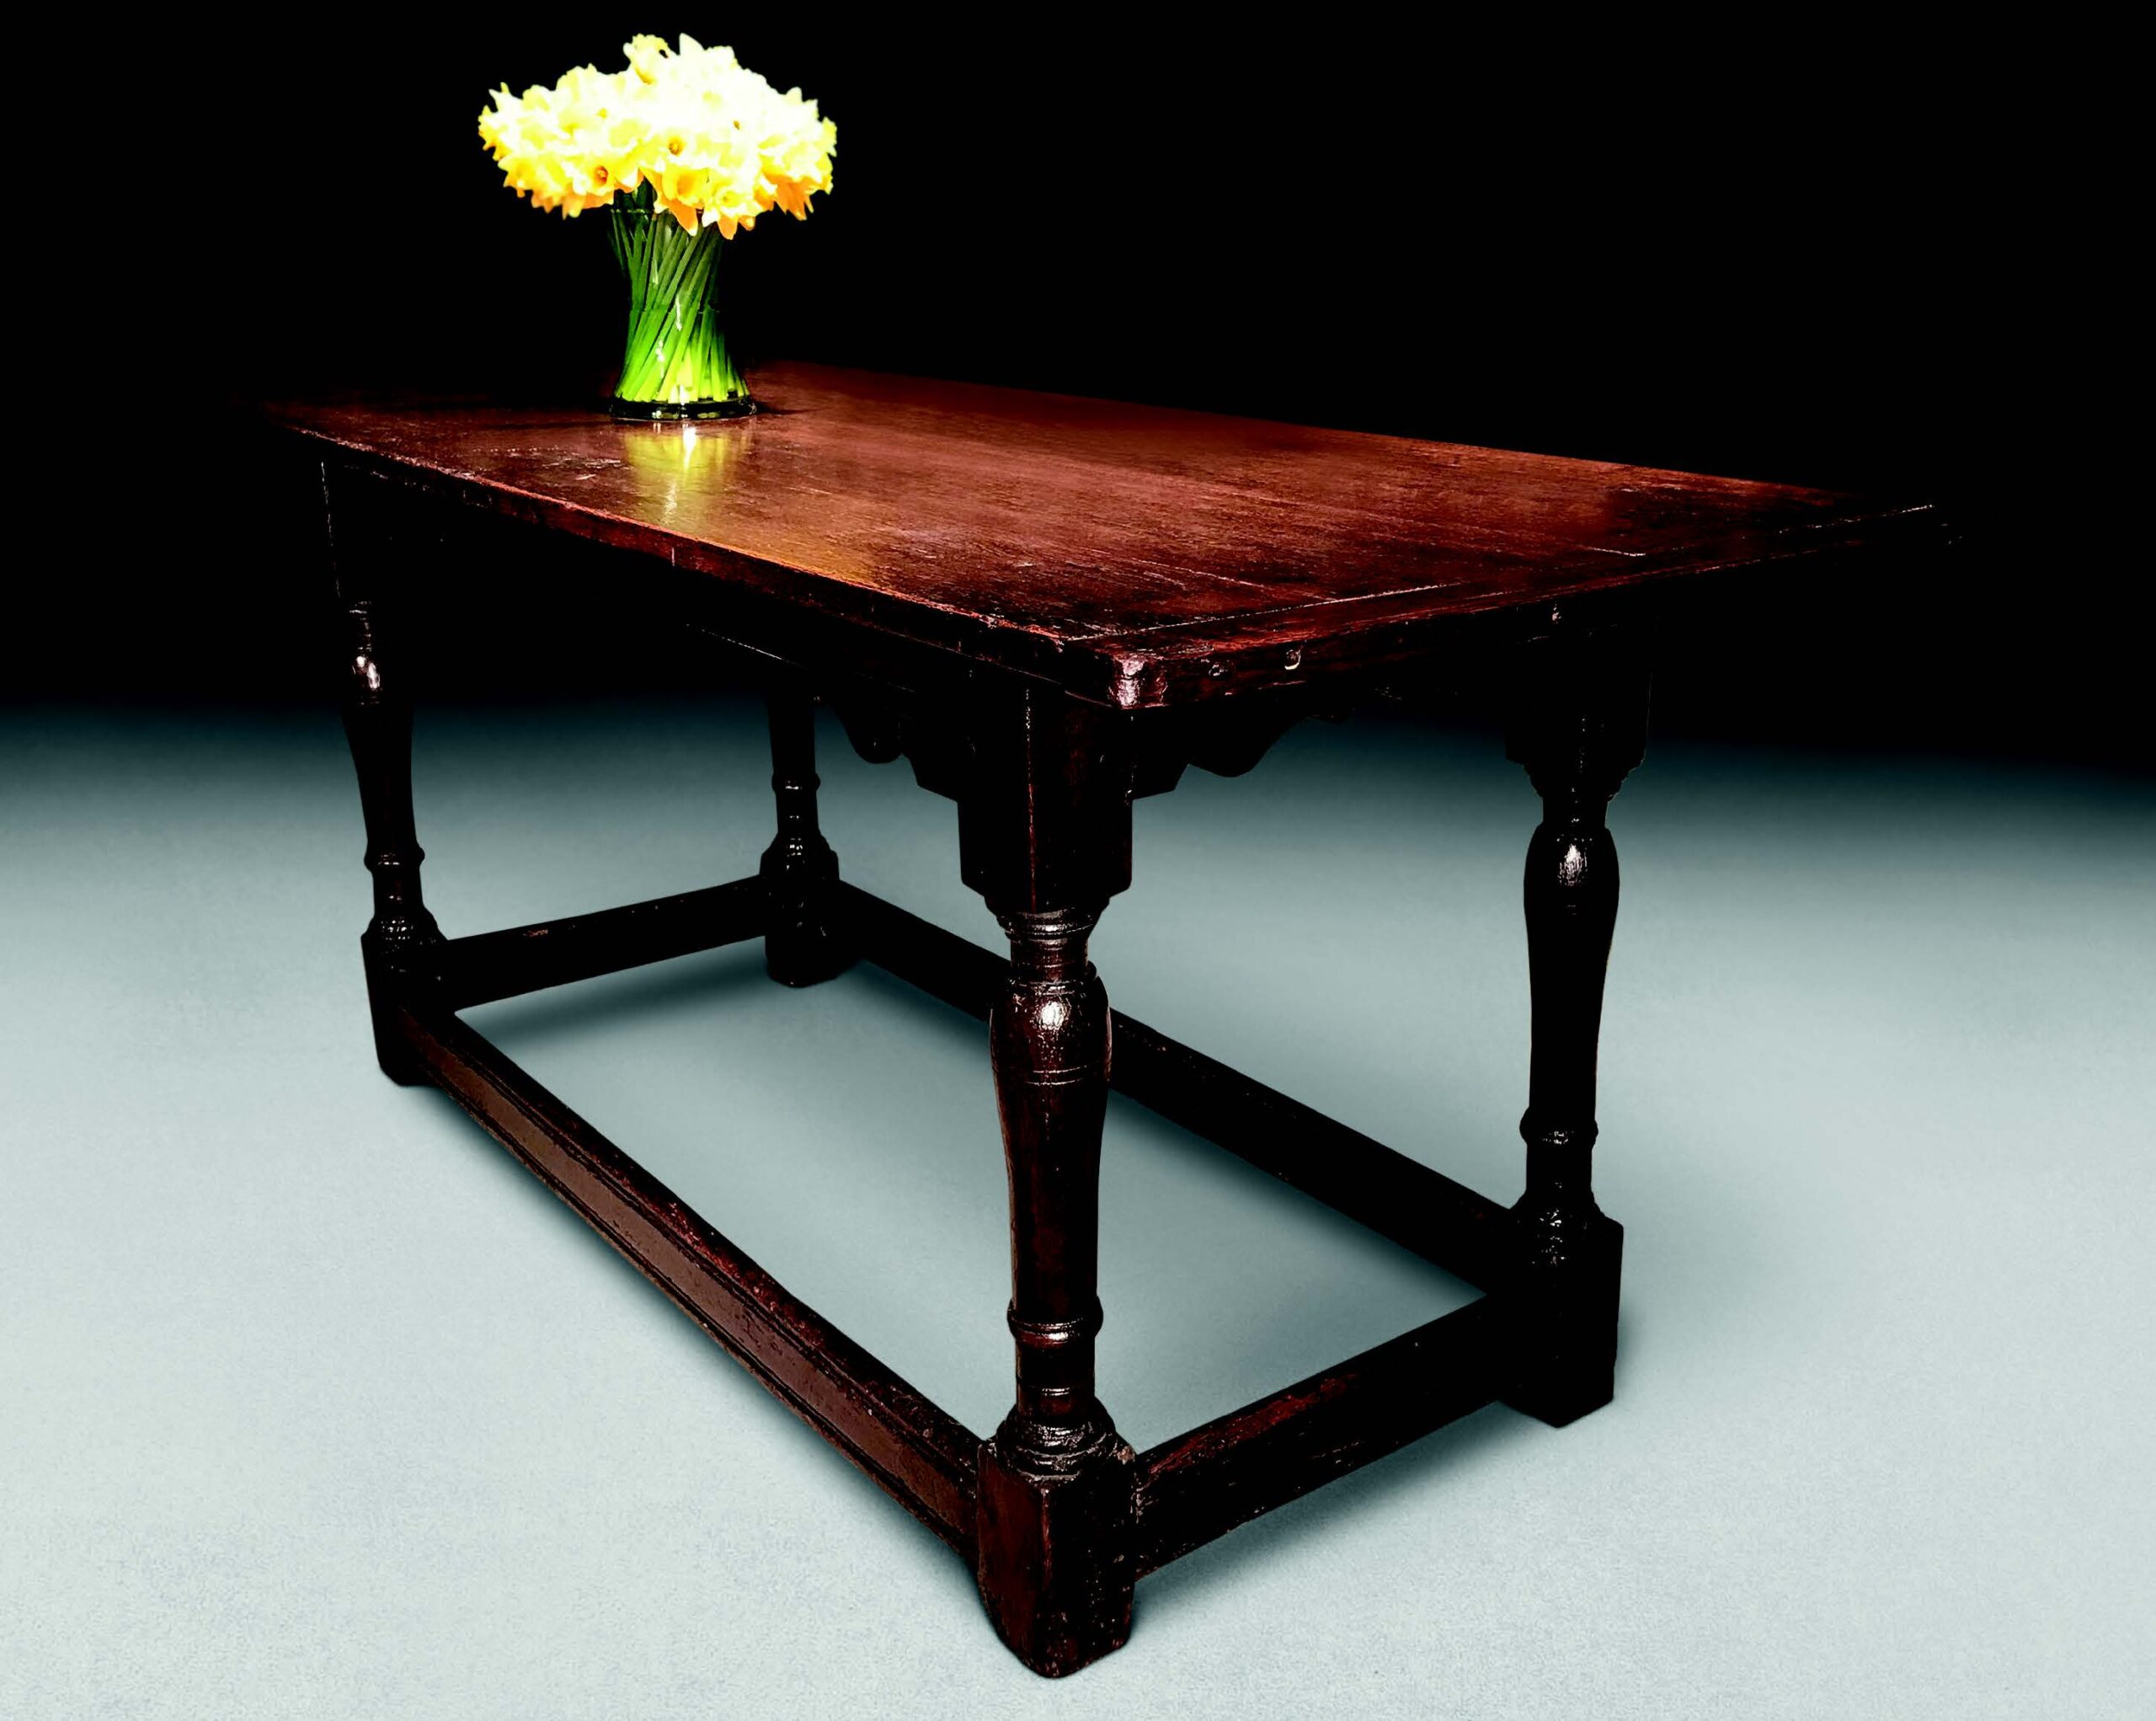 A Late 17th-century oak refectory table